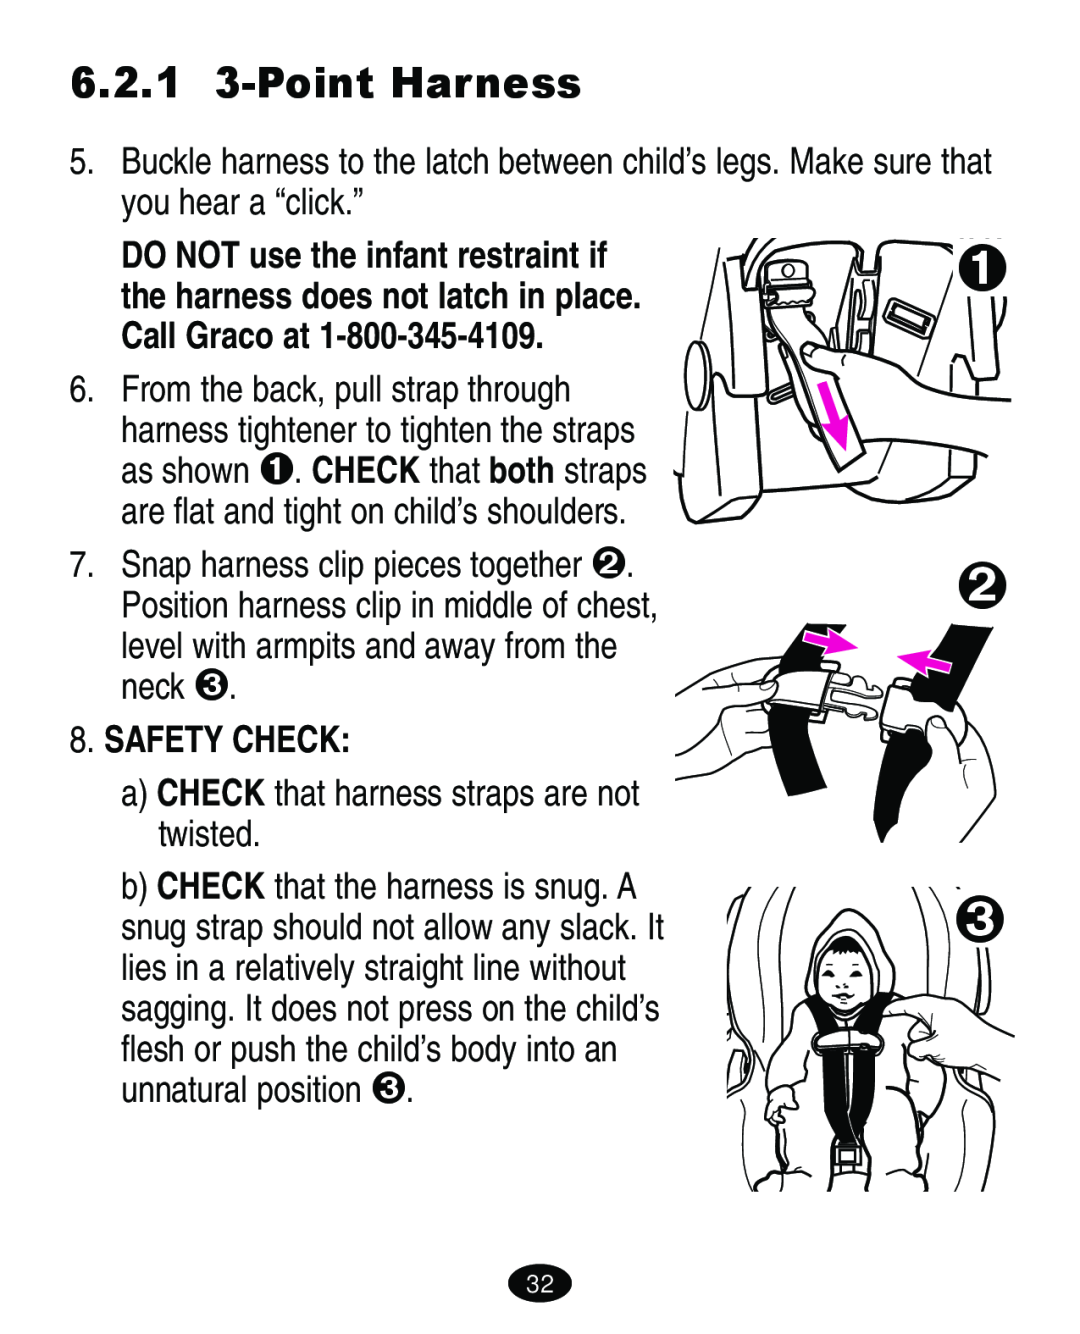 Graco ISPA109AC manual 6.2.1 3-Point Harness, Safety Check 